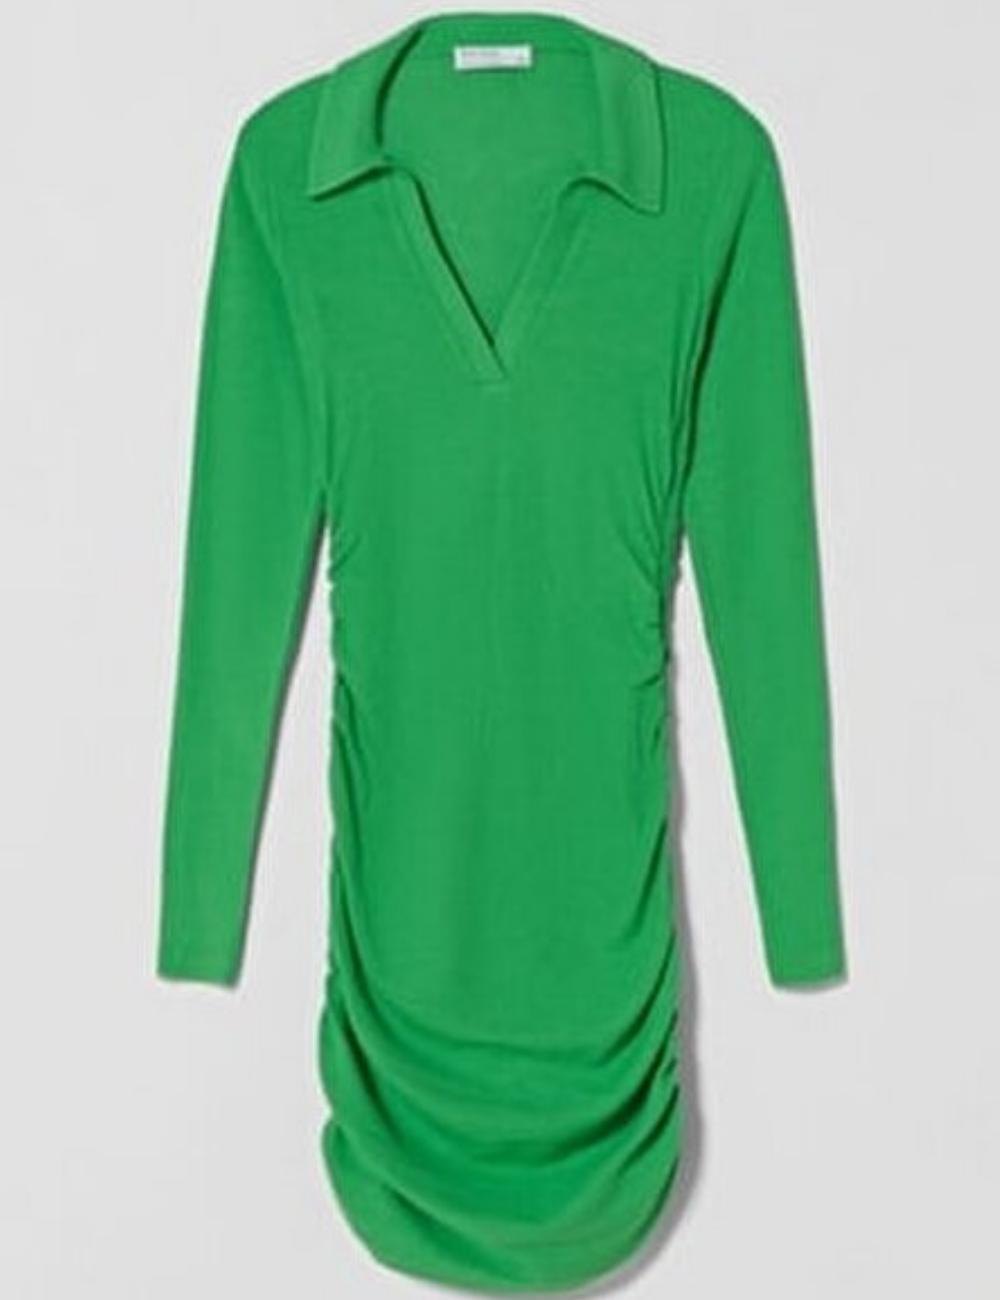 Foreigner semaphore Changes from Rochie midi Bershka, verde 17551 | creamoutlet.ro